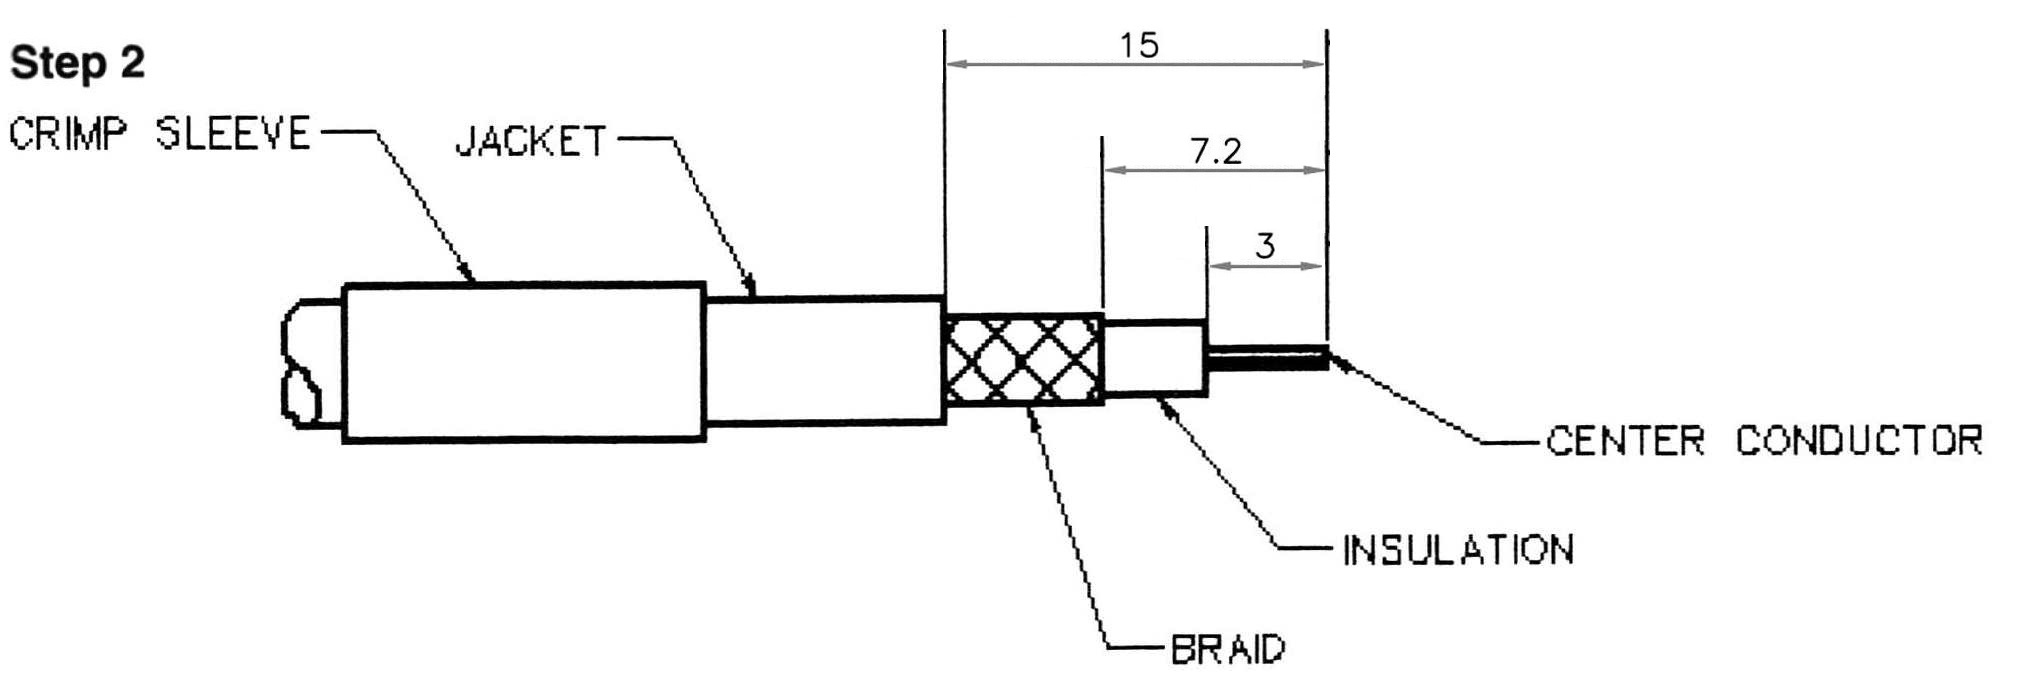 BNC male Crimp On for RG-174, RG-316, LMR-100A, and other 0.100 Inch OD Coax 7005-BNC-174 Installation Guide step 2 - Max-Gain Systems, Inc.